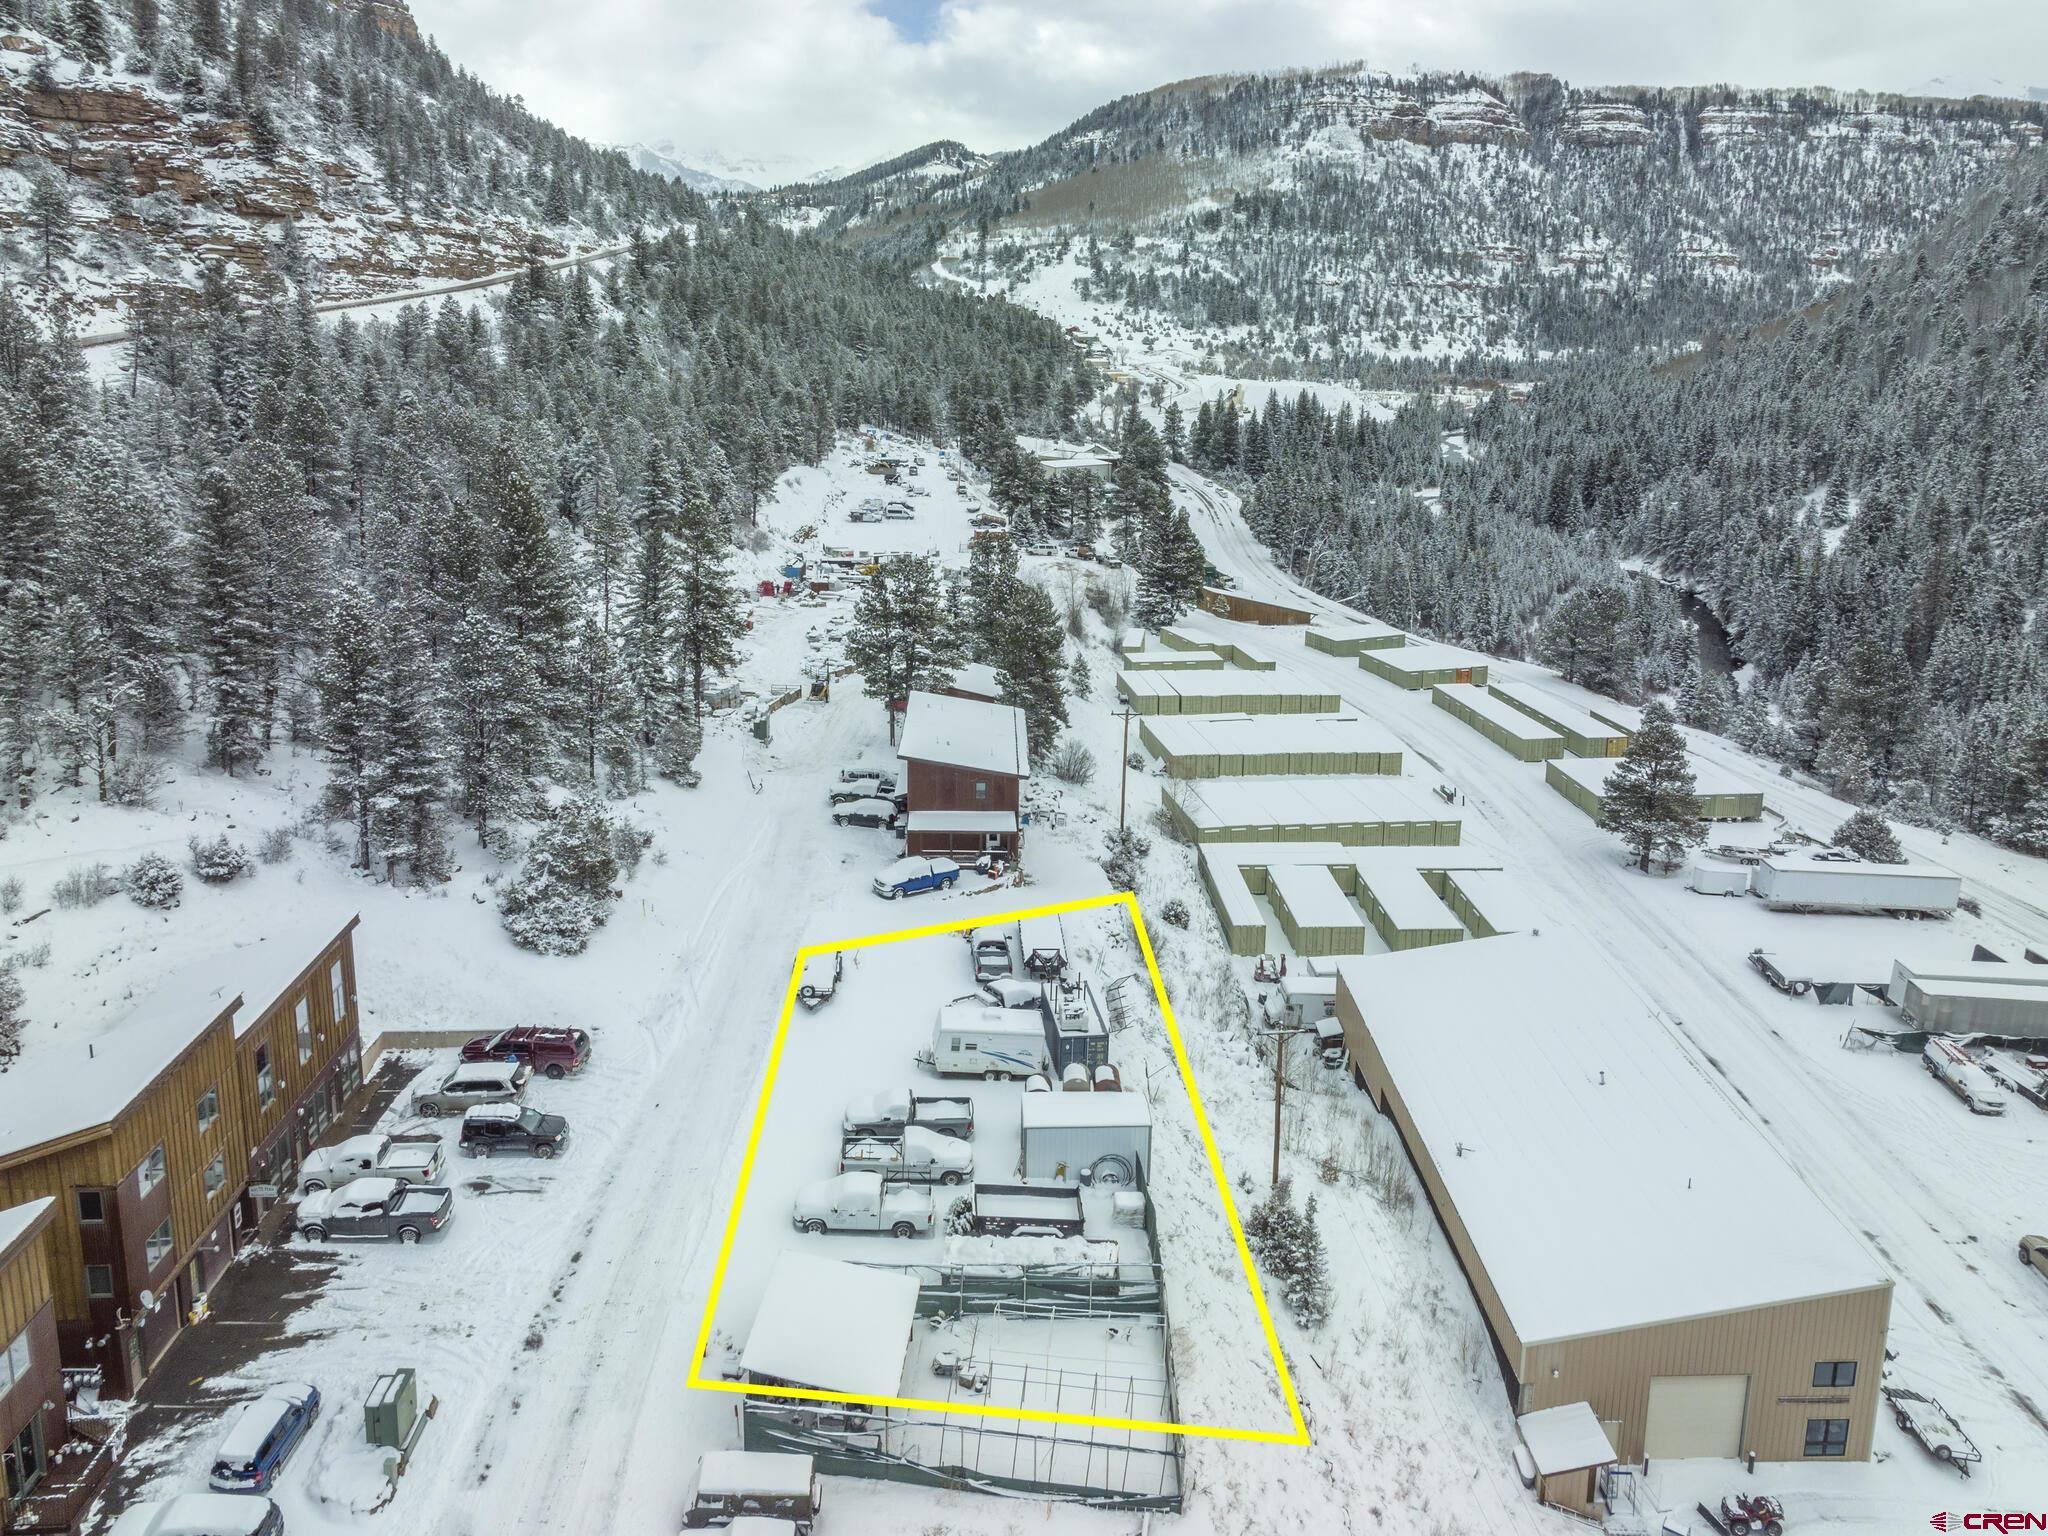 Undeveloped commercial lot opportunity in the Ilium Industrial area. Great building site for a business or hold it as an investment. There are not many vacant commercial lots available in the Telluride region - do not miss this opportunity! Contact me to discuss further!